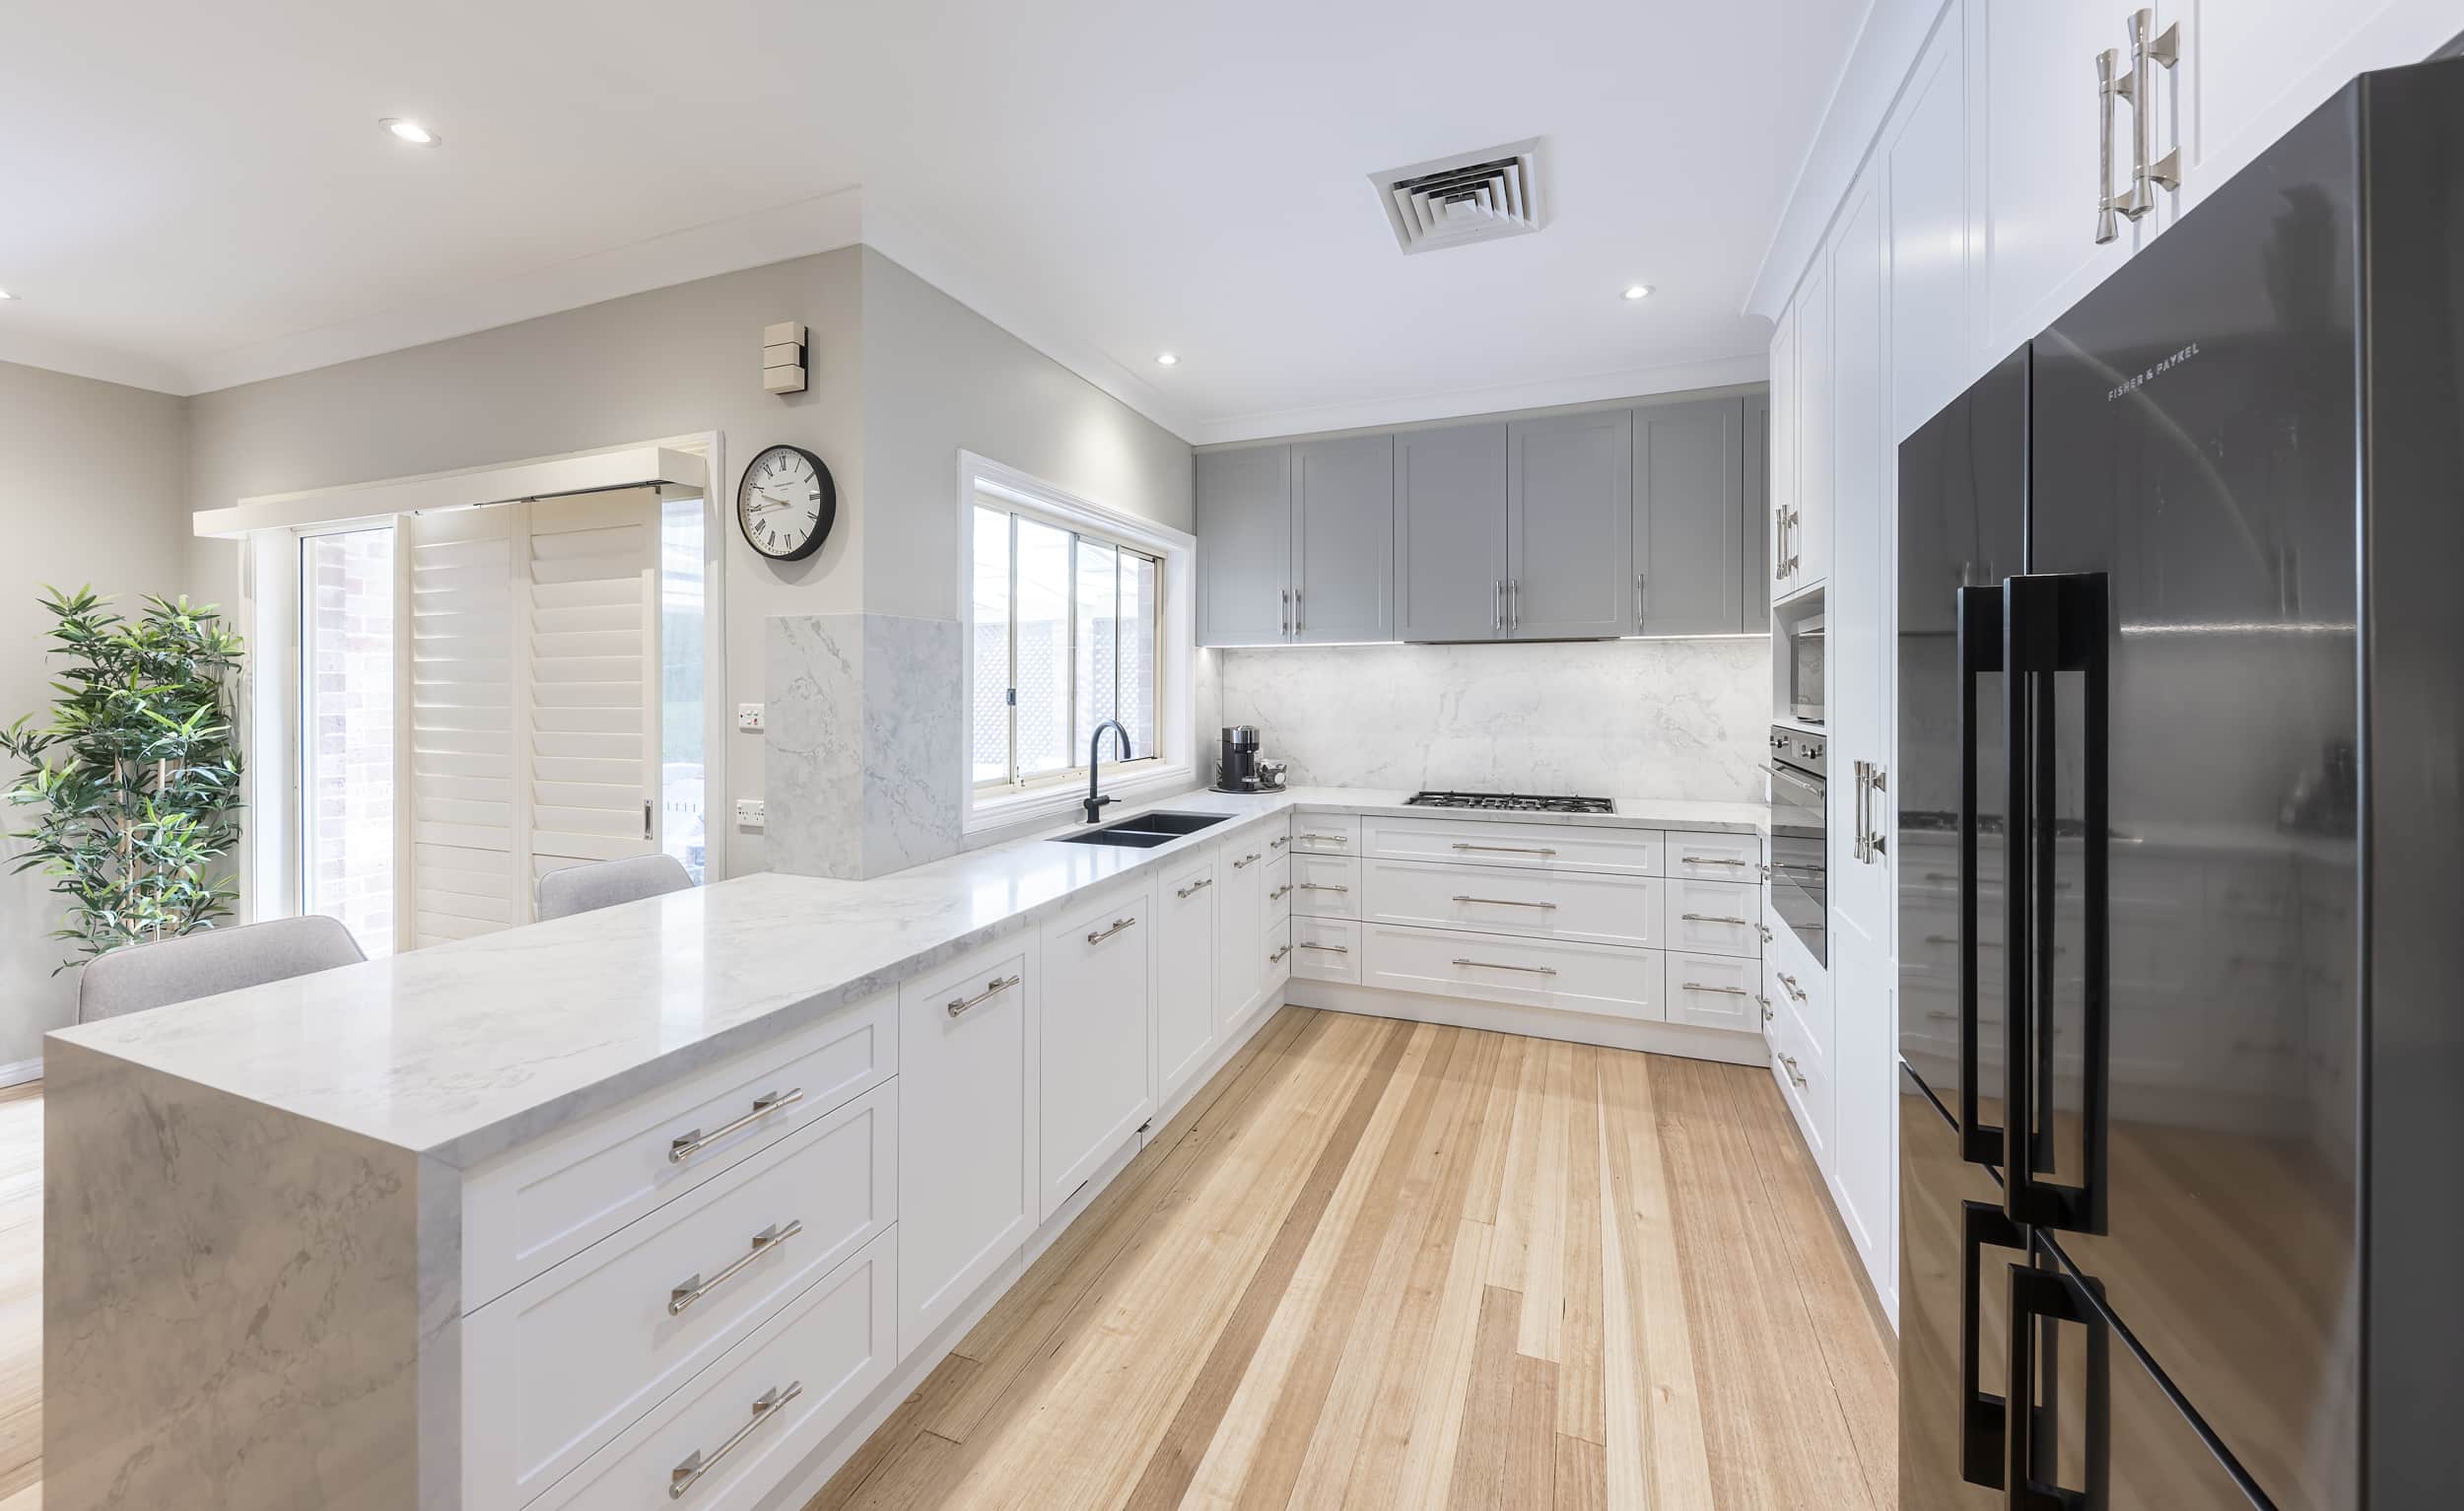 This is a range of hampton style kitchens after renovation by AJB Kitchens. Project location is in Cherrybrook